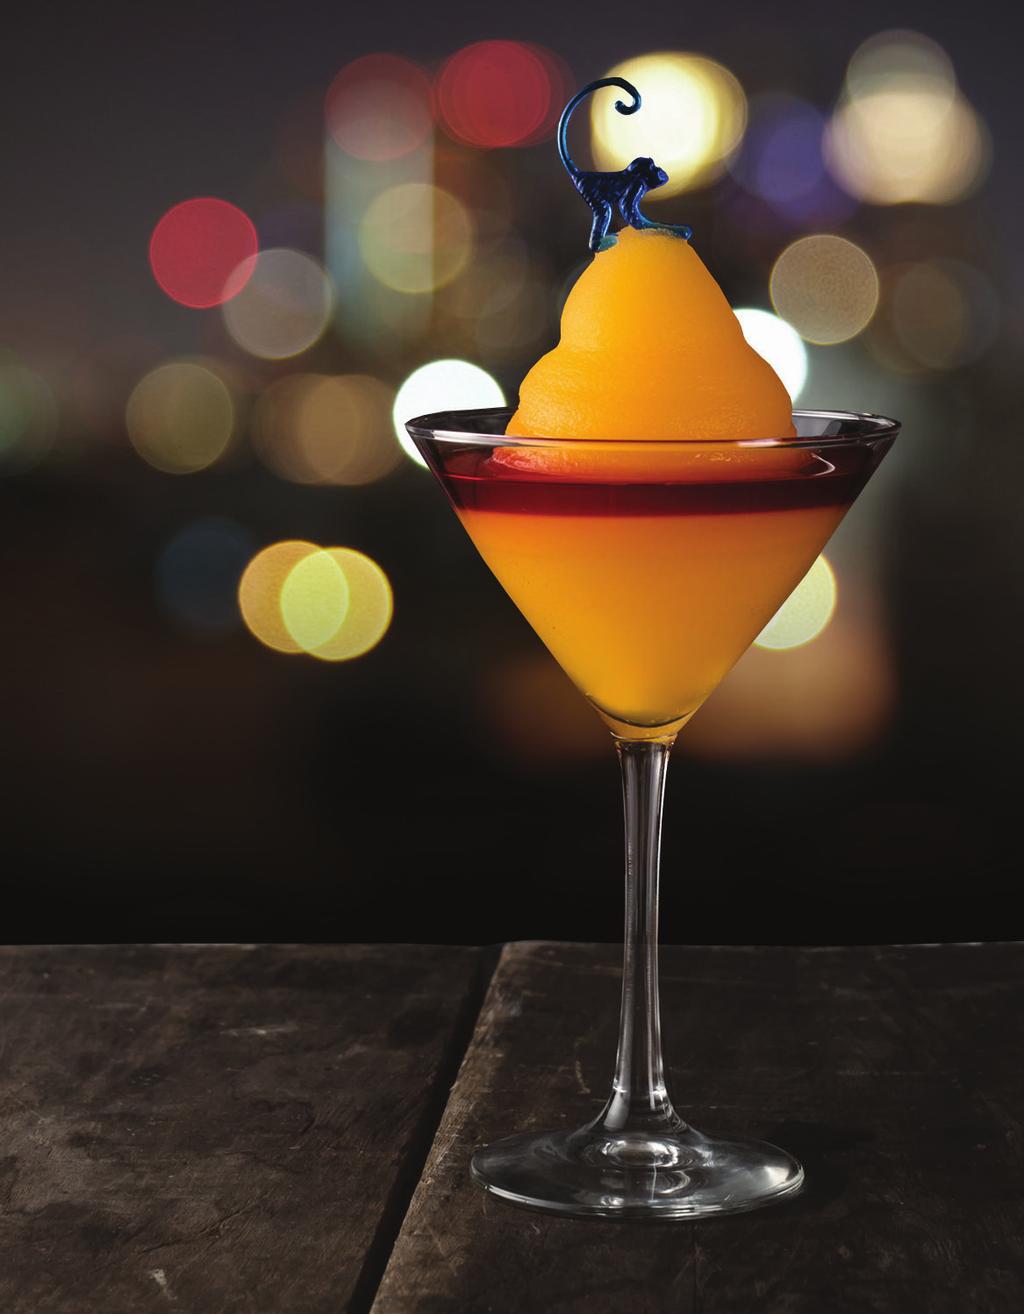 The Bellini was invented in 1934 by Giuseppe Cipriani, founder of Harry s Bar in Venice, Italy.